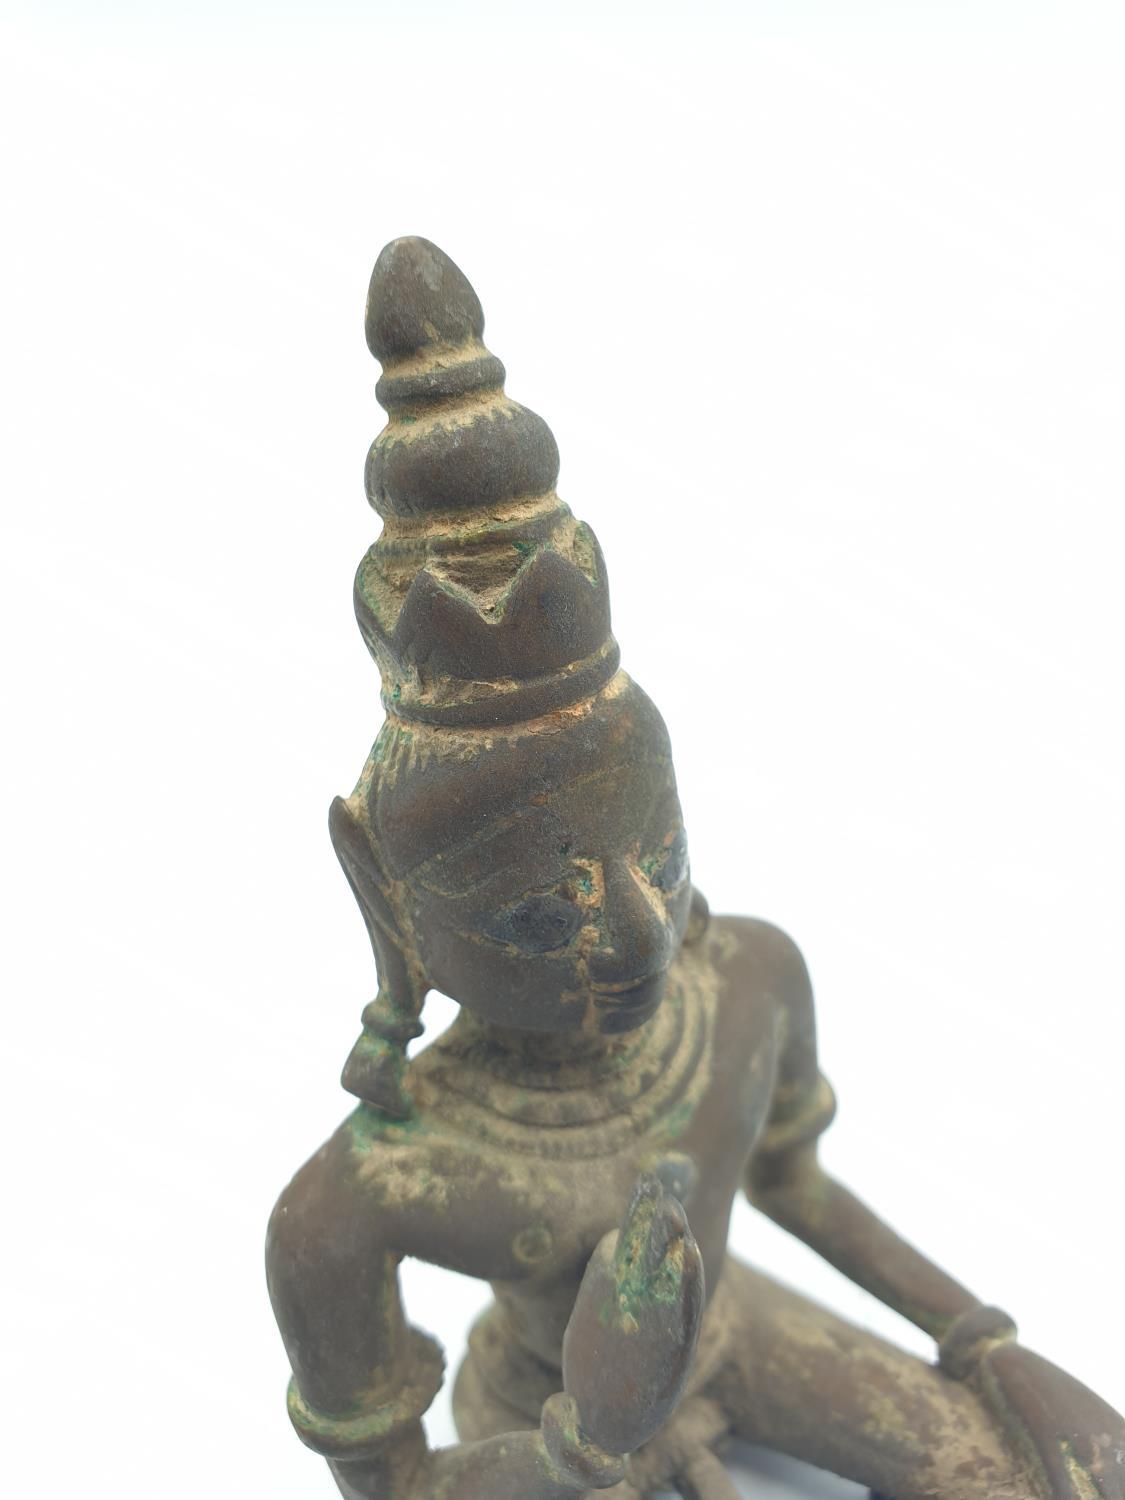 Late 18th century Oriental religious figure in bronze with gilt finish mostly worn off with age, 9cm - Image 5 of 9